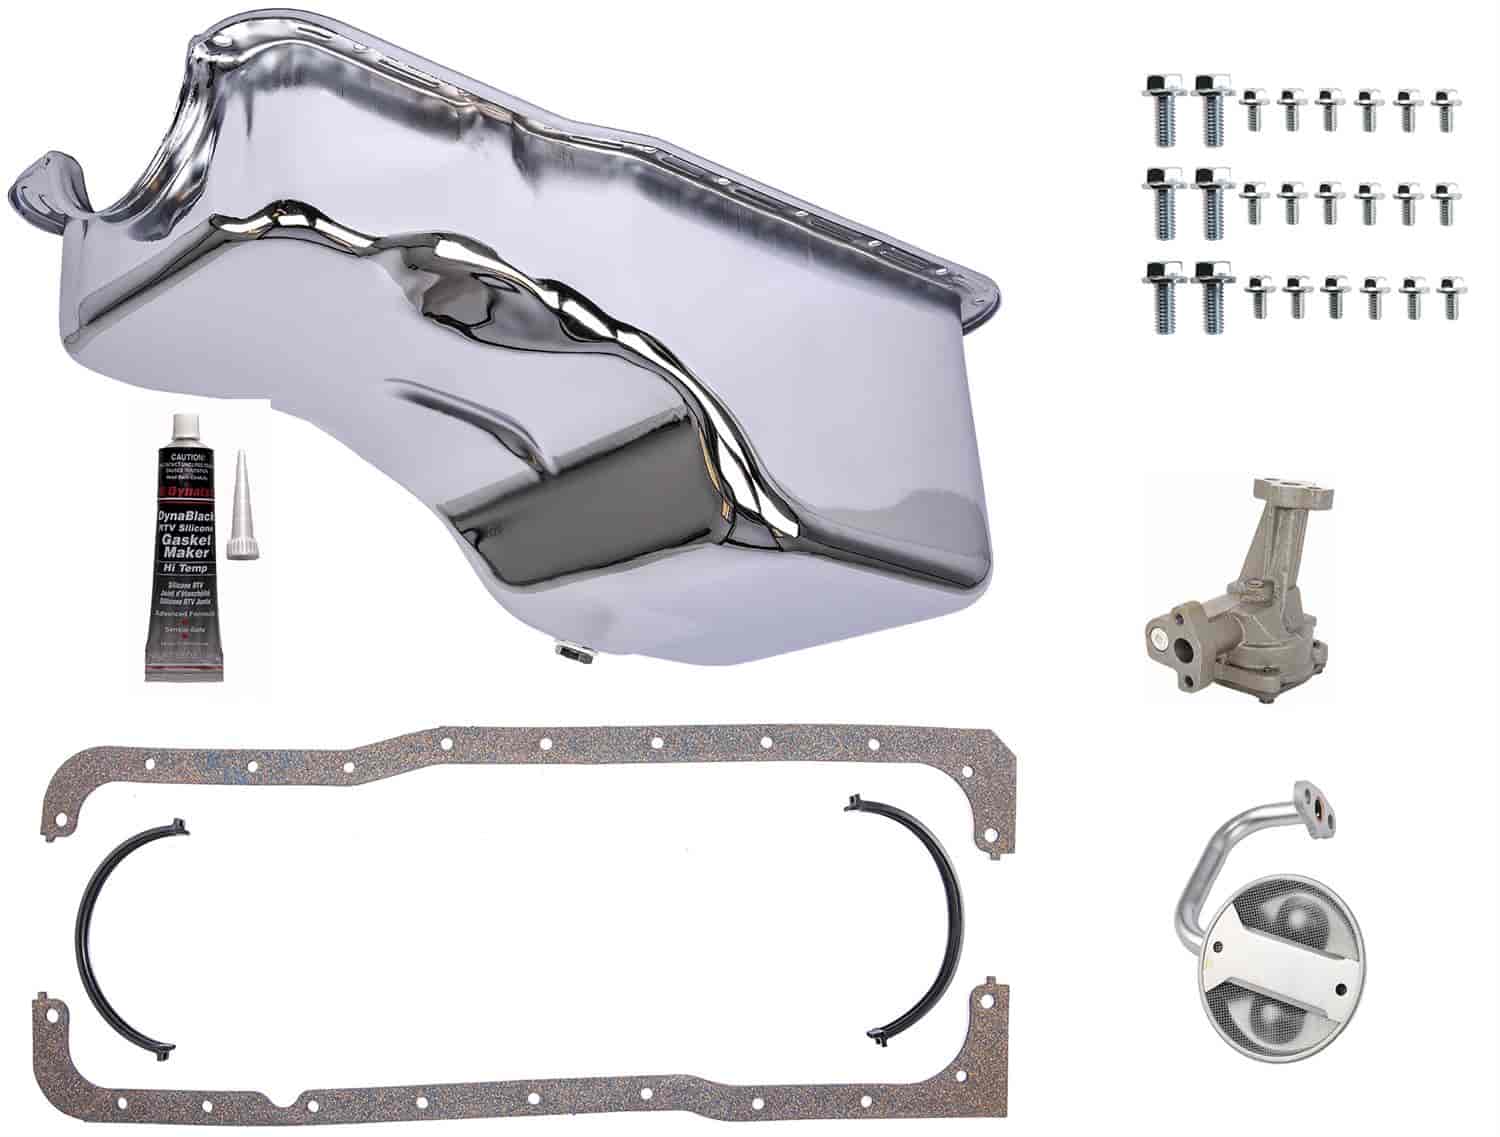 Stock-Style Replacement Oil Pan Kit for 1965-1987 Small Block Ford 260-302 [Chrome]